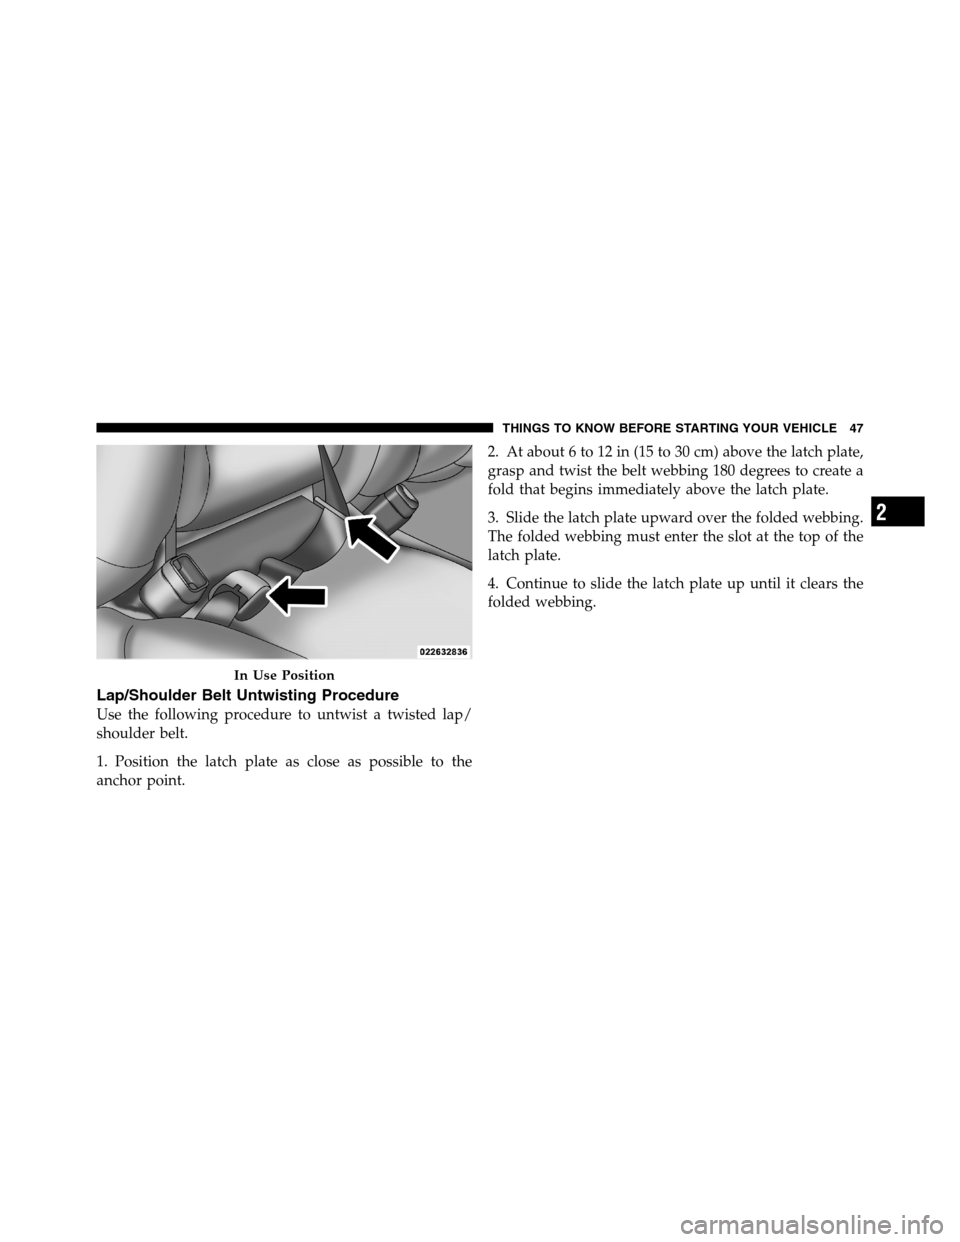 Ram 3500 2011 Service Manual Lap/Shoulder Belt Untwisting Procedure
Use the following procedure to untwist a twisted lap/
shoulder belt.
1. Position the latch plate as close as possible to the
anchor point.2. At about 6 to 12 in 